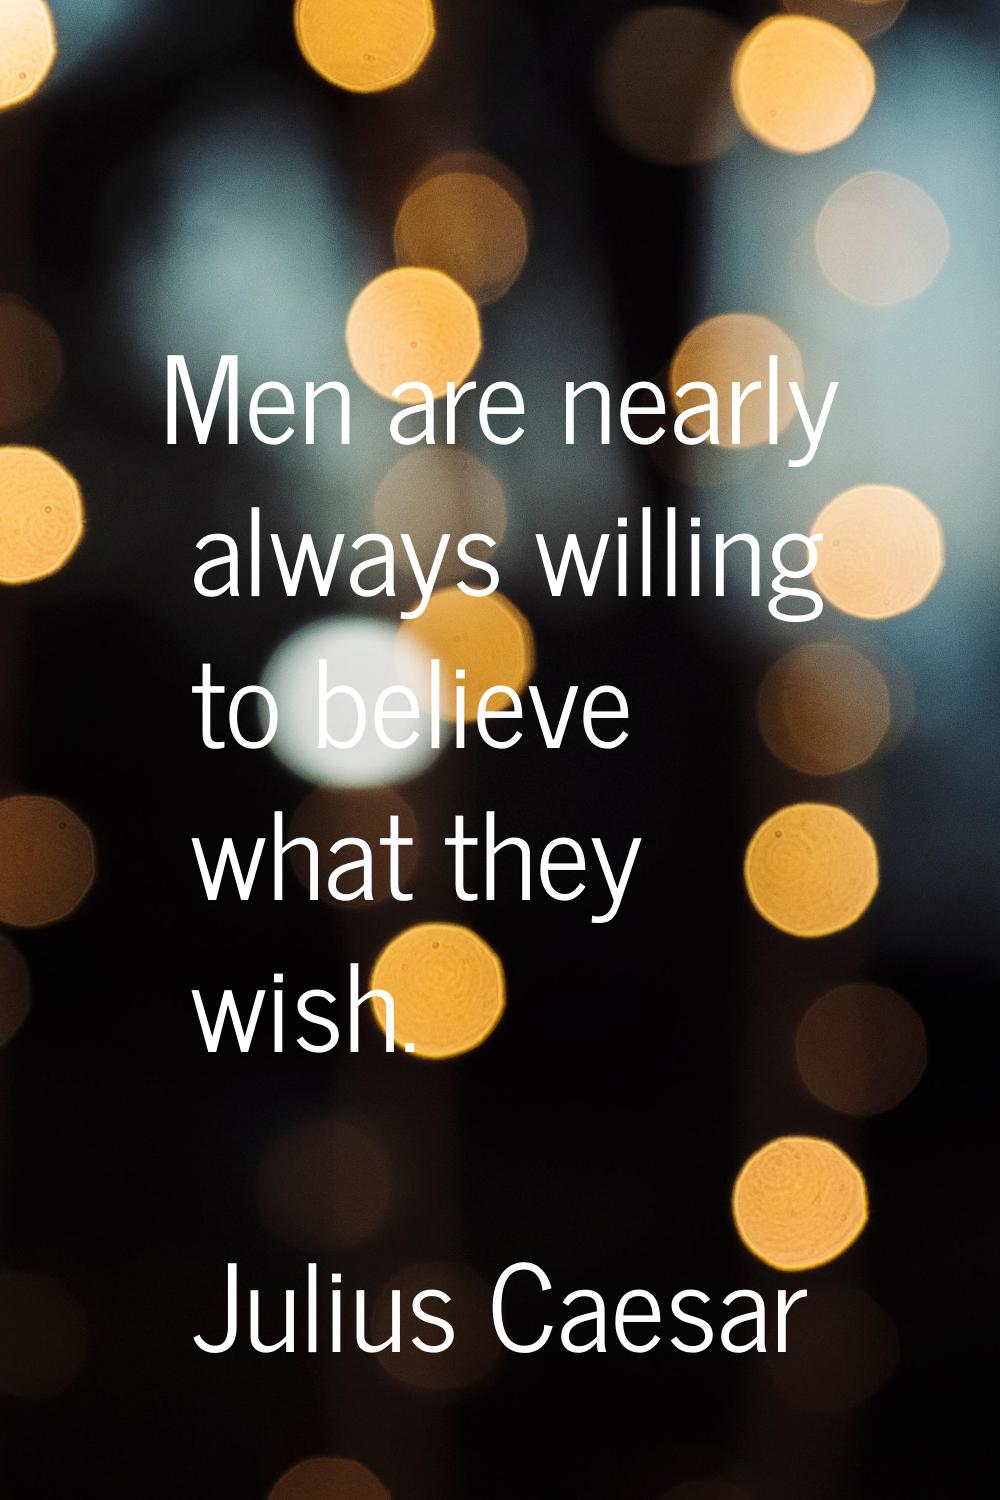 Men are nearly always willing to believe what they wish.